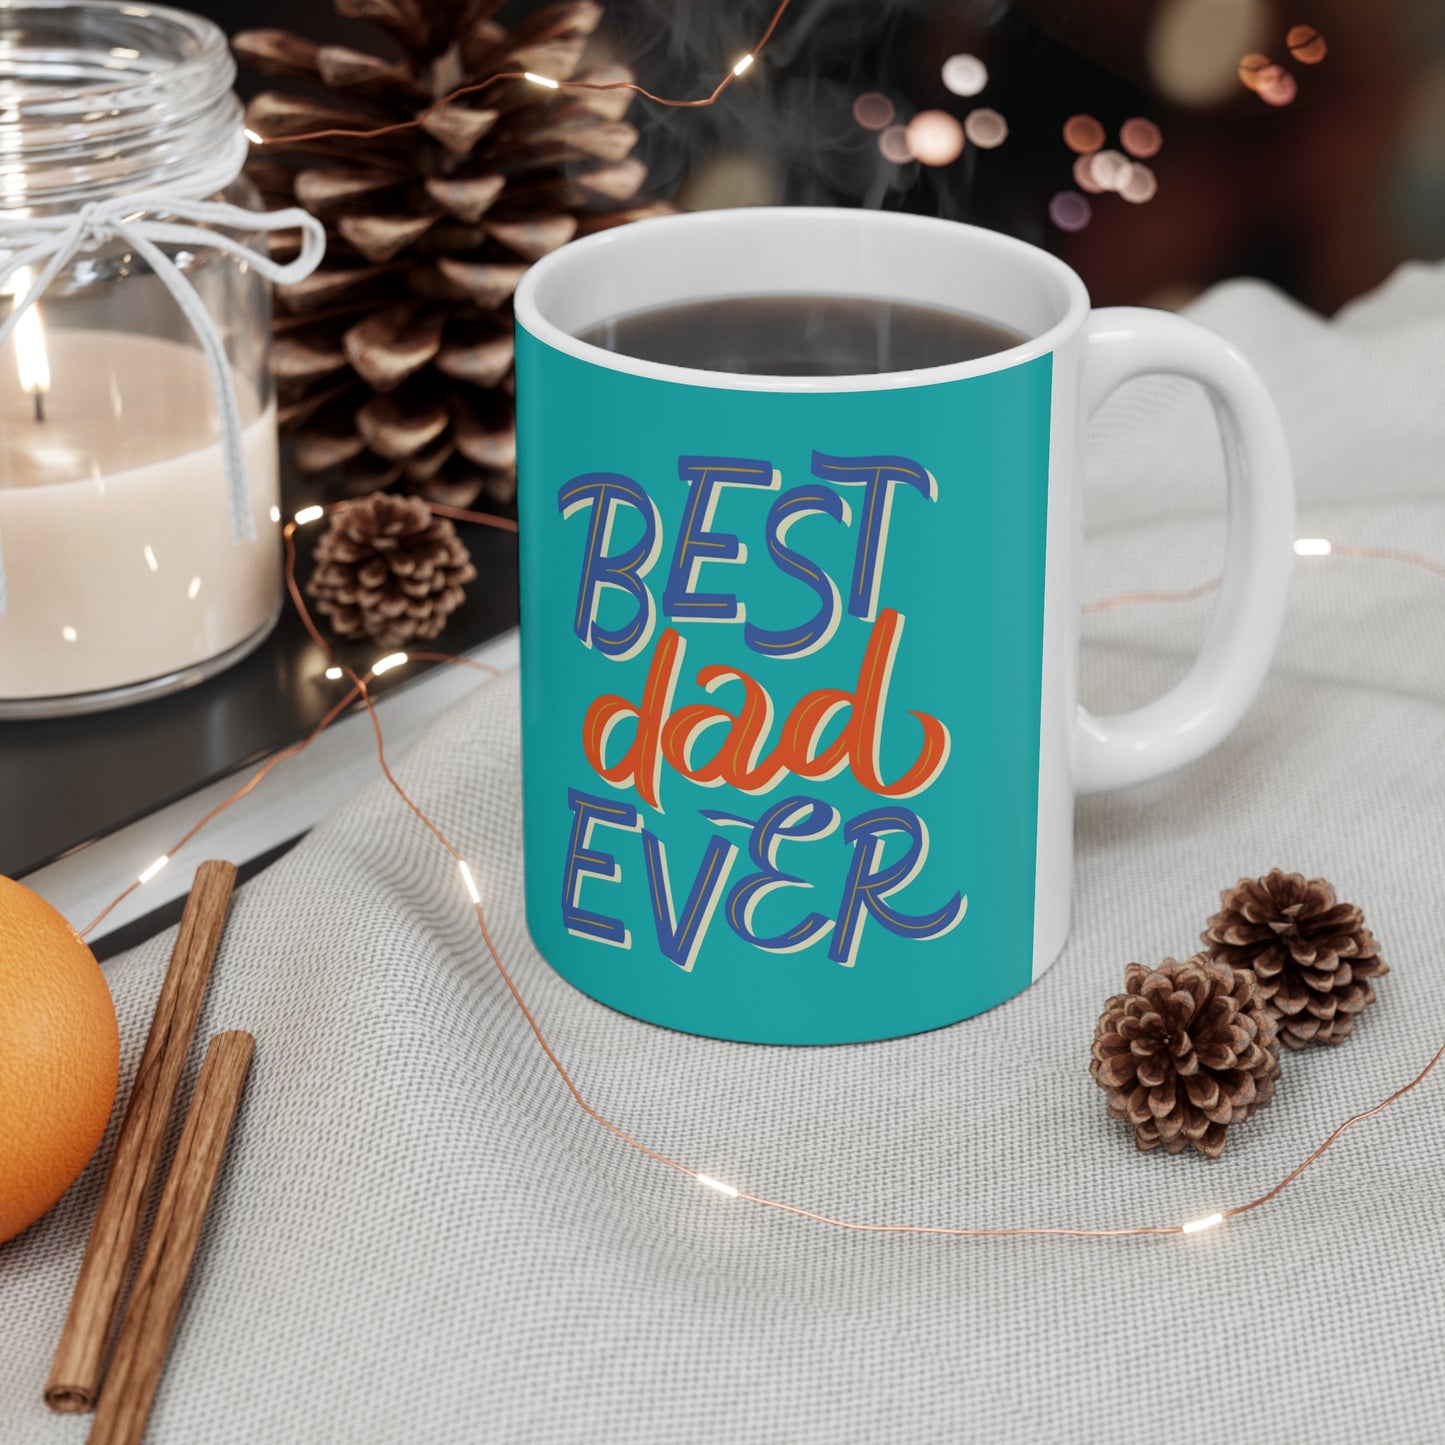 “BEST DAD EVER” on one side and dad dancing with his kid. Part of several mugs to choose from depending on what resonates with you.